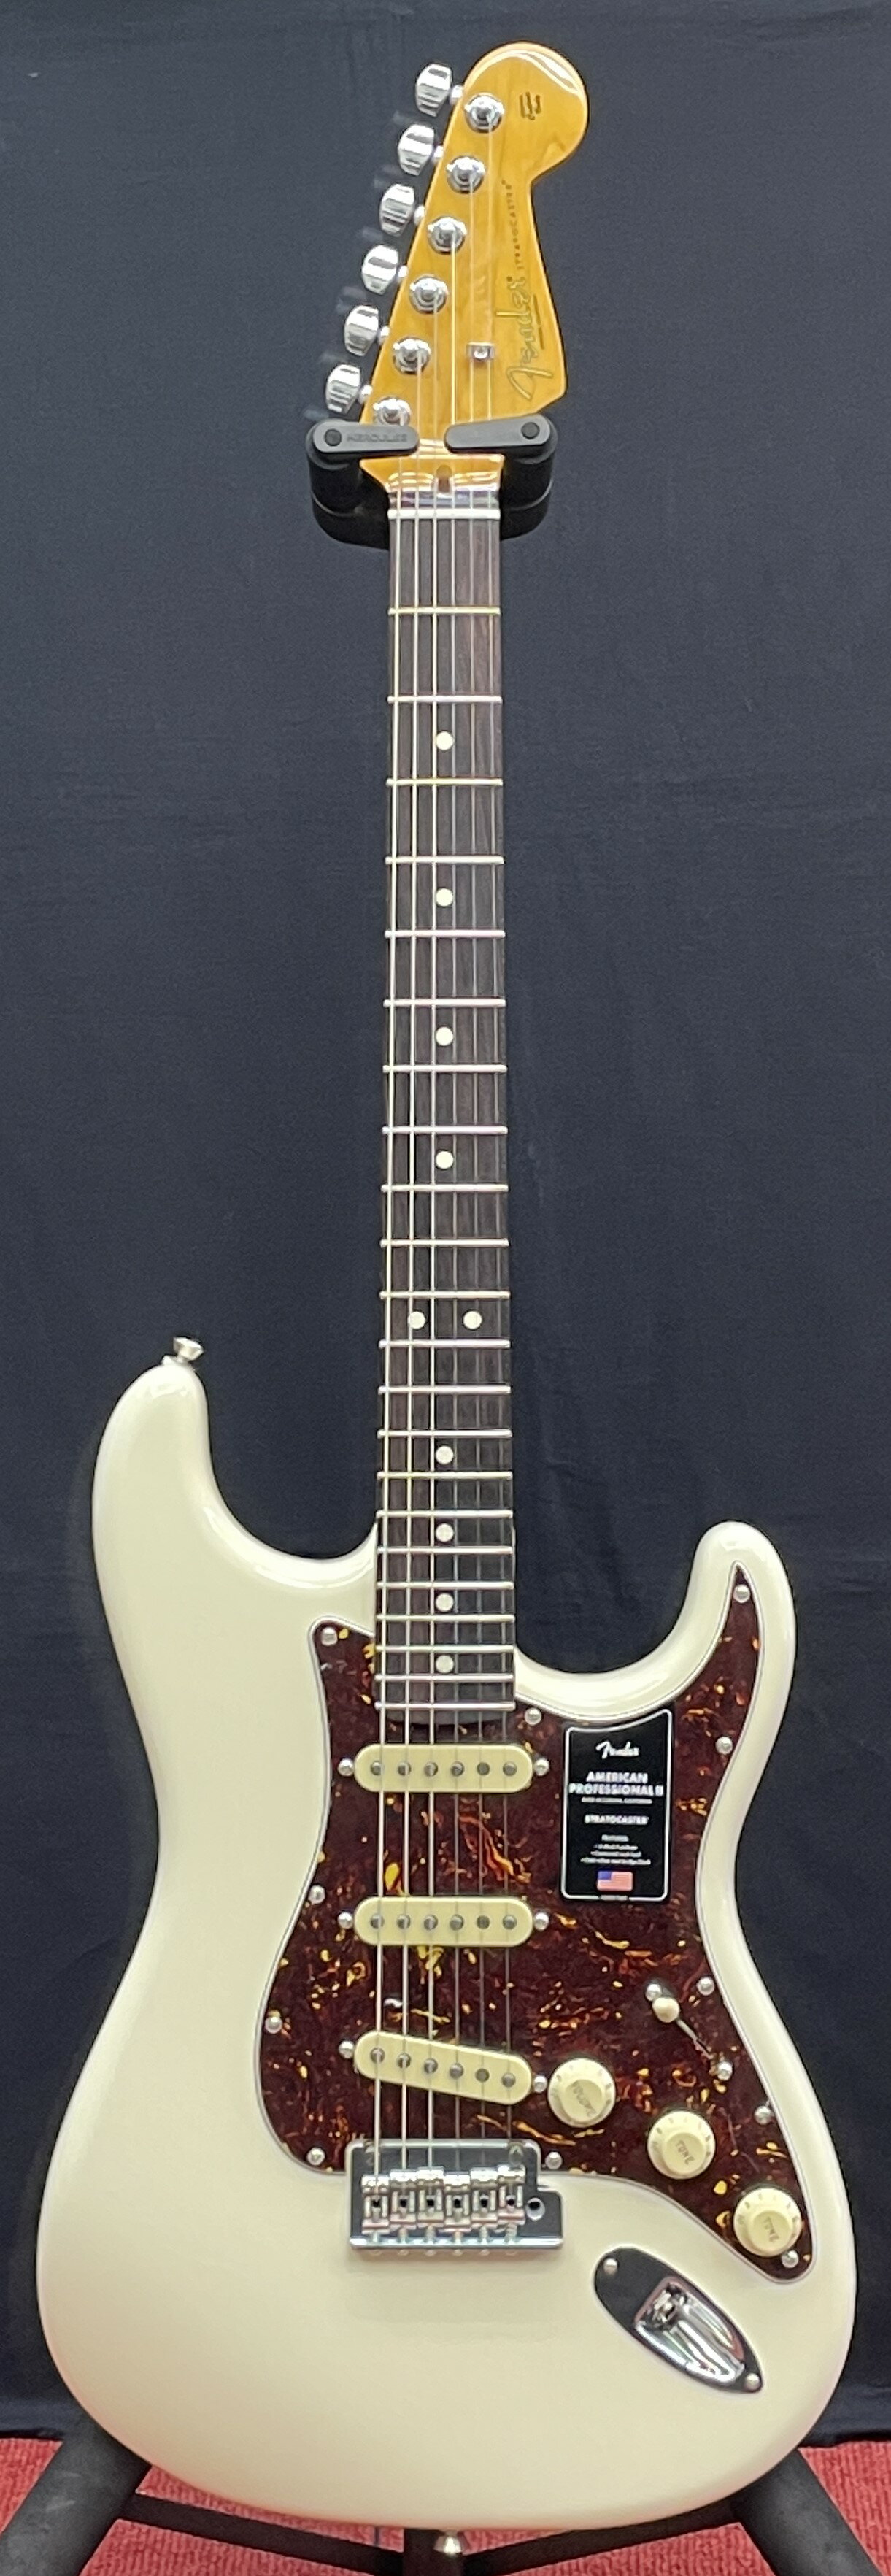 Fender American Professional II Stratocaster -Olympic White/Rosewood-【US22176853】【3.49kg】[フェンダー][プロフェッショナル][ストラトキャスター][White,ホワイト,白][Electric Guitar,エレキギター]